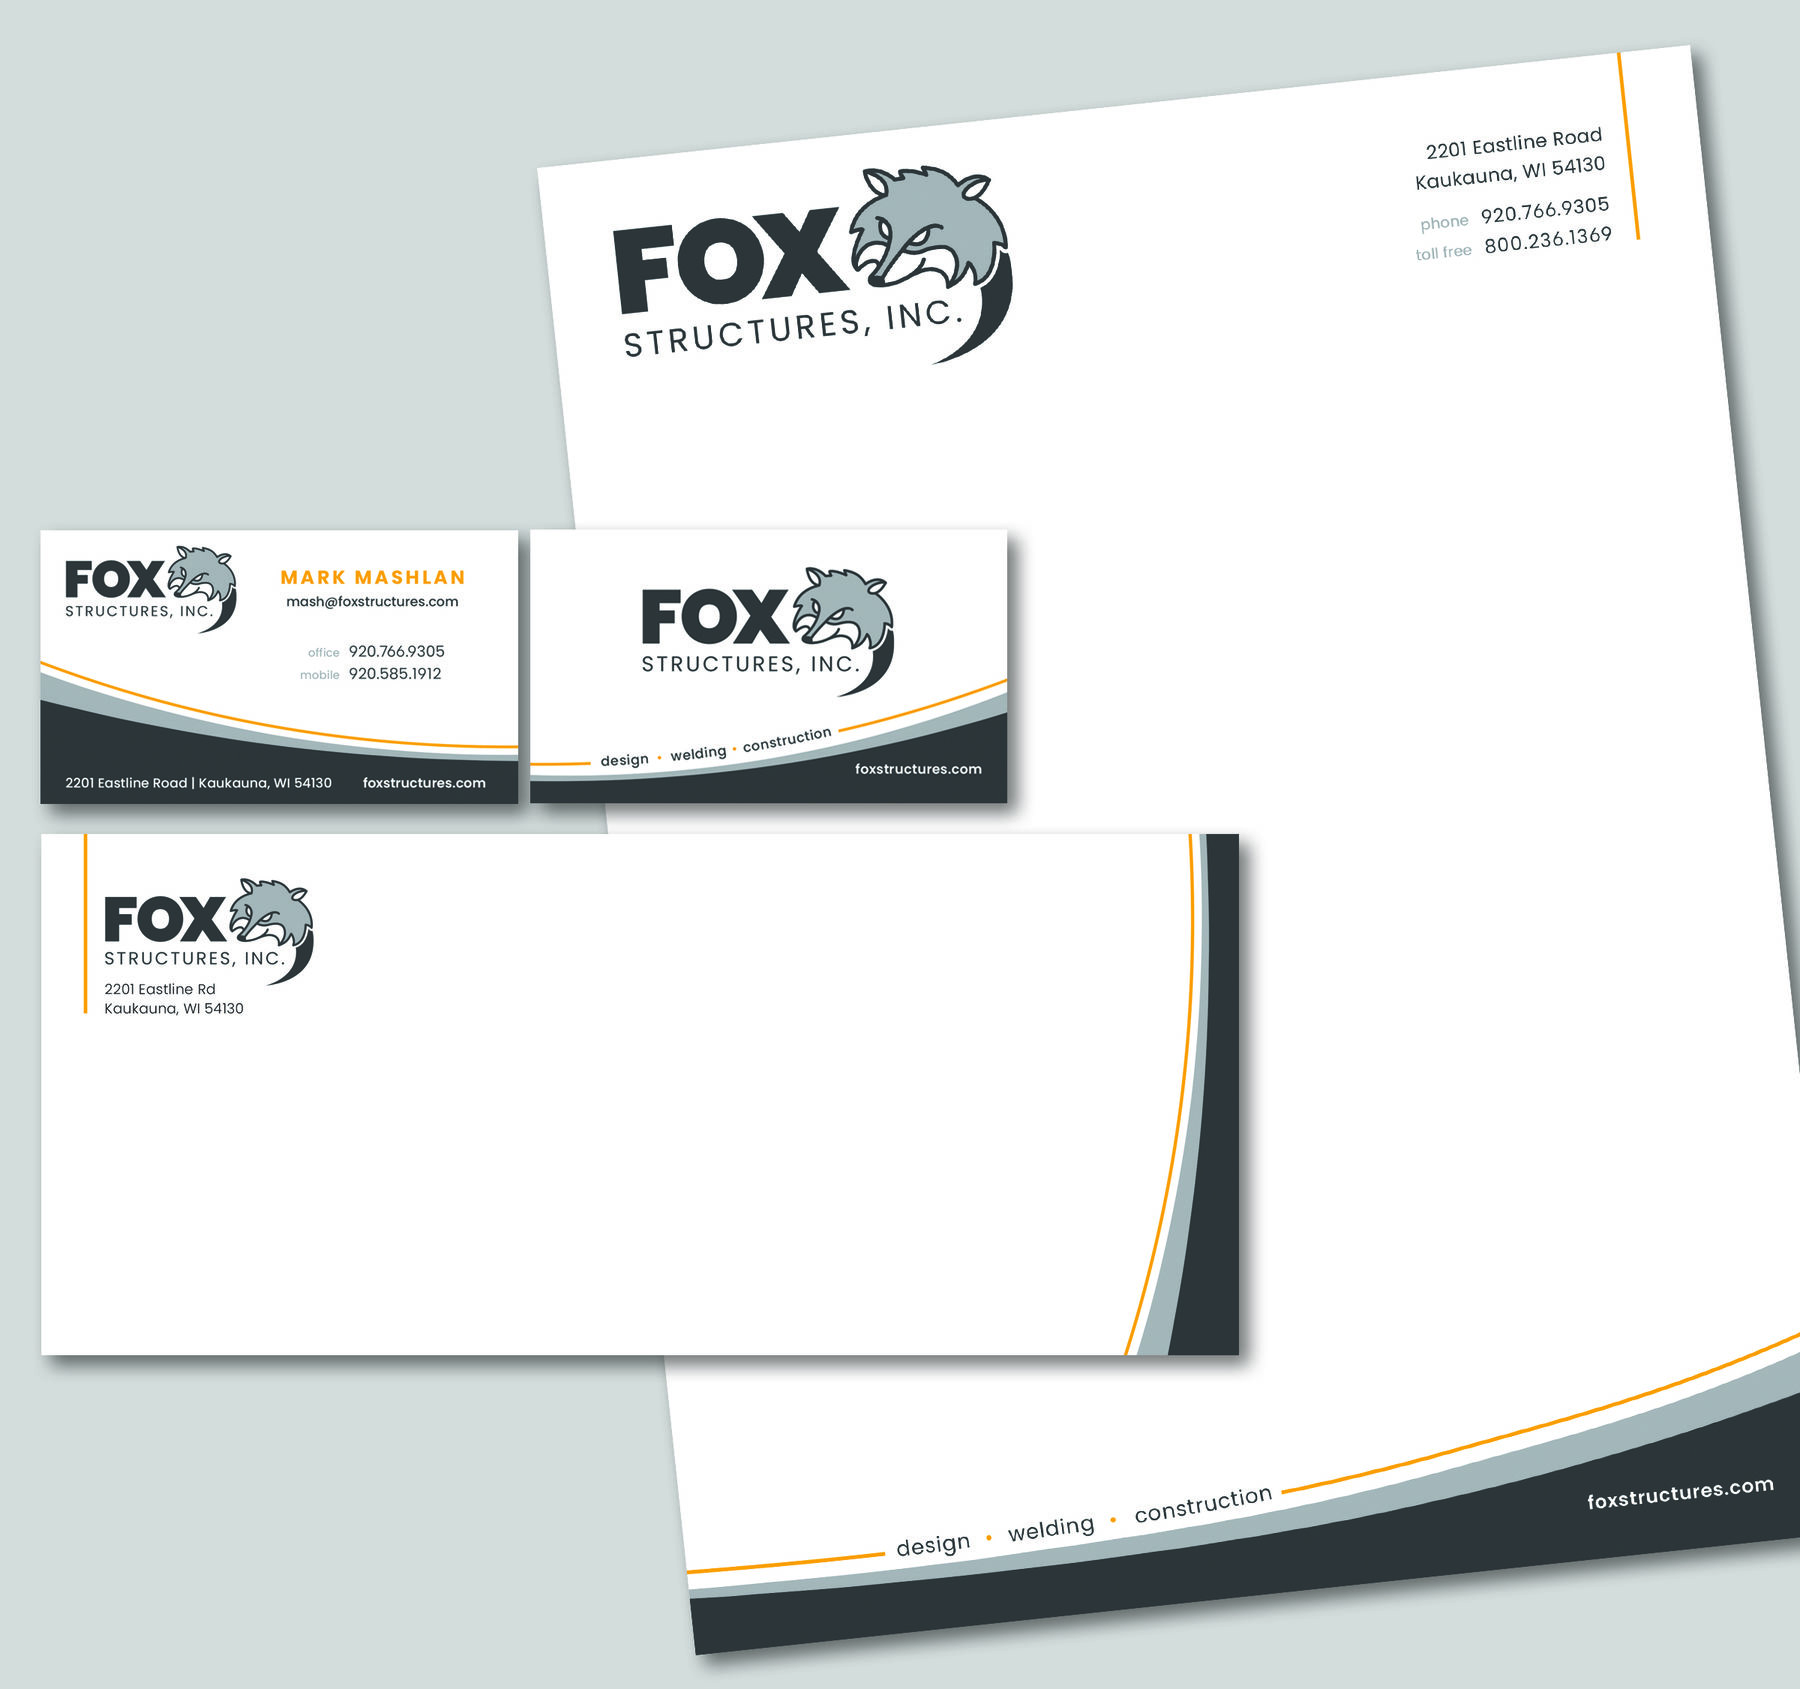 Fox Structures custom business card designs, custom envelope designs and custom letterhead designs